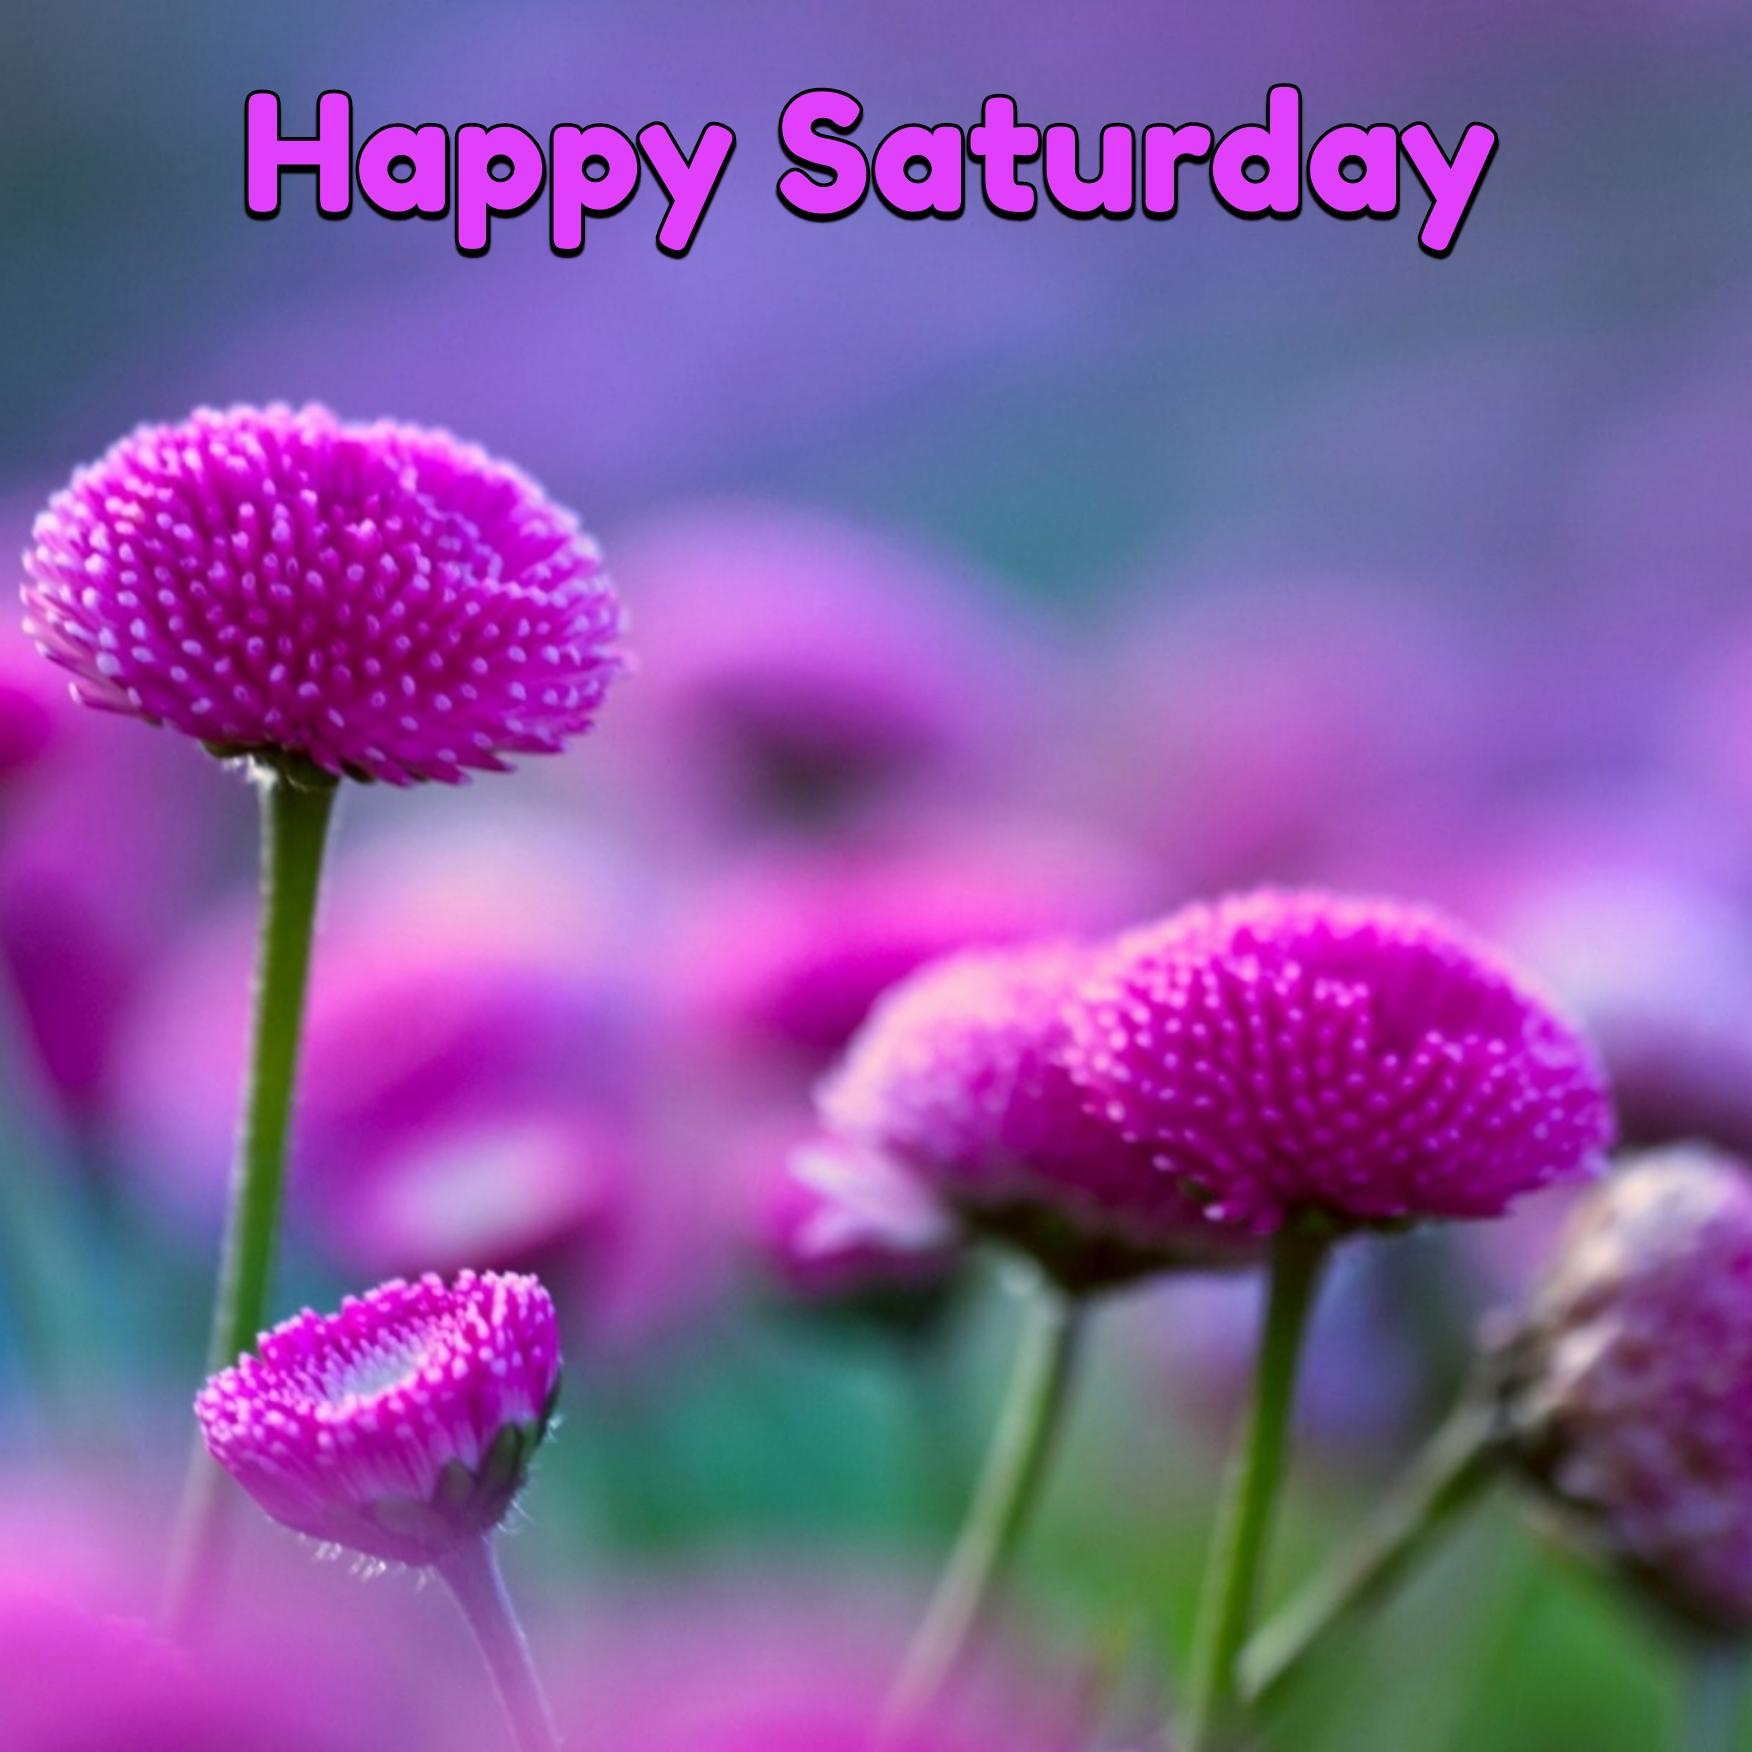 Happy Saturday Images 2022 HD Download